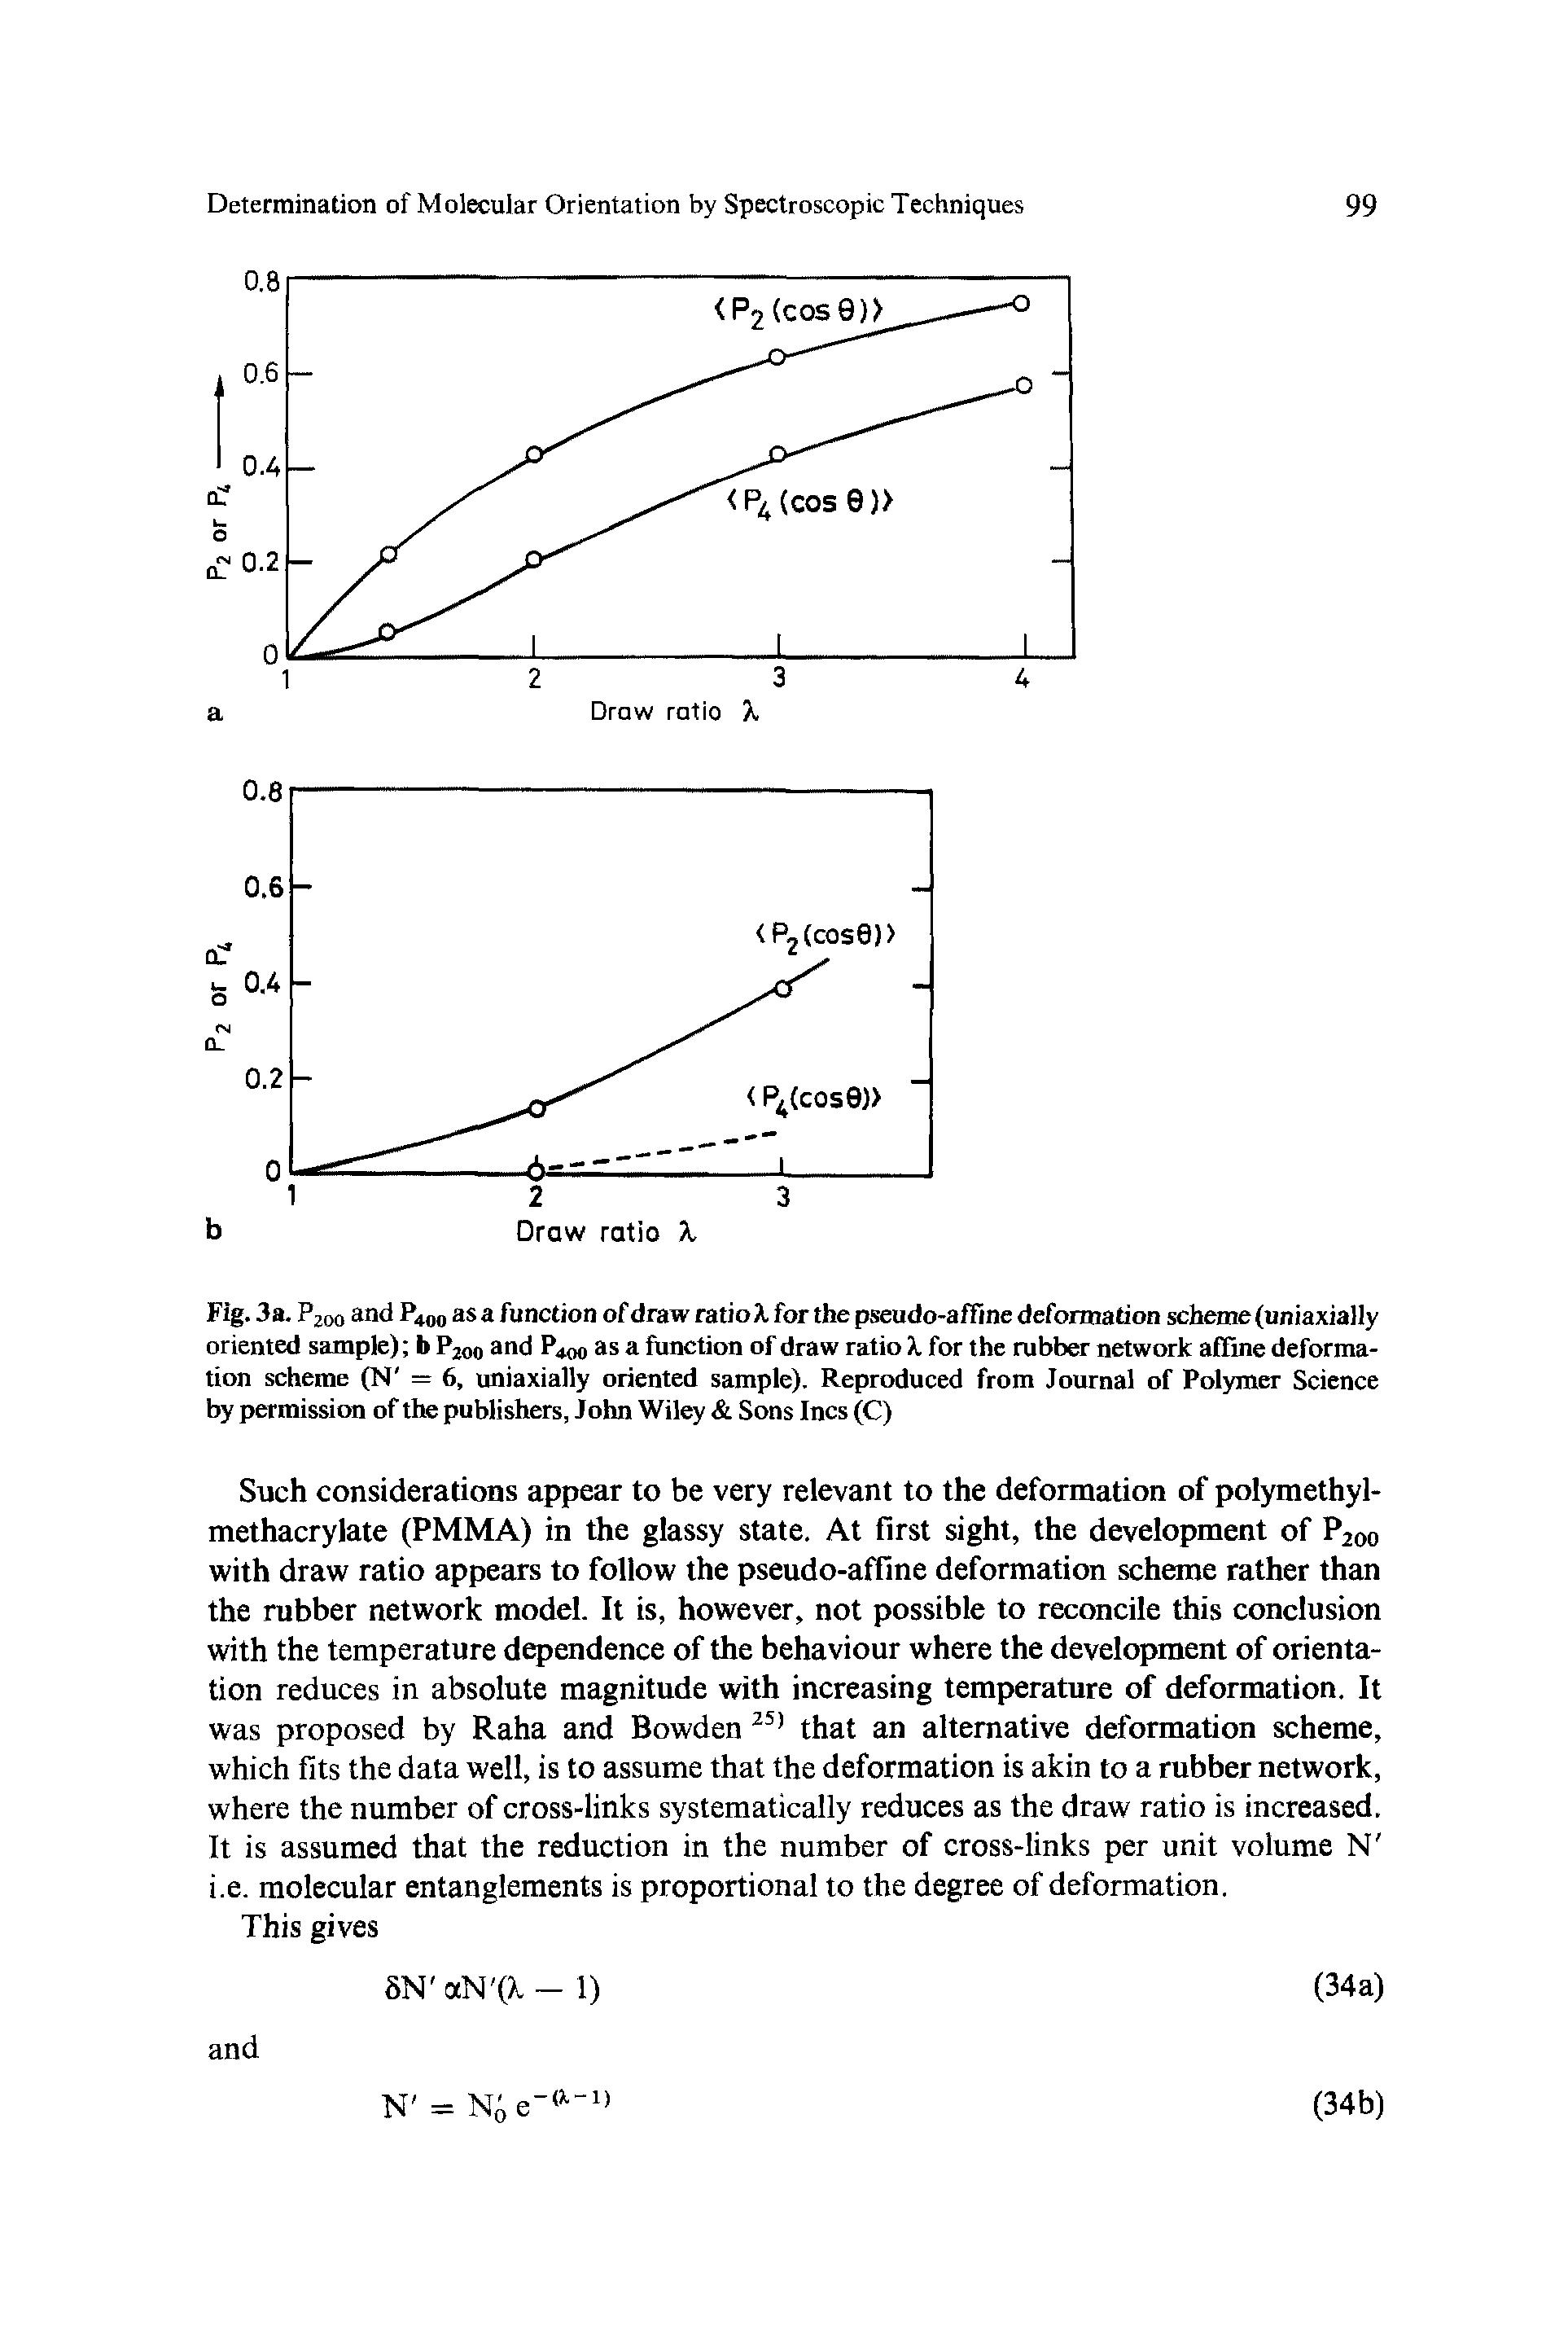 Fig. 3a. P200 and P400 as a function of draw ration for the pseudo-affine deformation scheme (uniaxially oriented sample) b P20o and P400 as a function of draw ratio X for the rubber network affine deformation scheme (N = 6, uniaxially oriented sample). Reproduced from Journal of Polymer Science by permission of the publishers, John Wiley Sons Incs (C)...